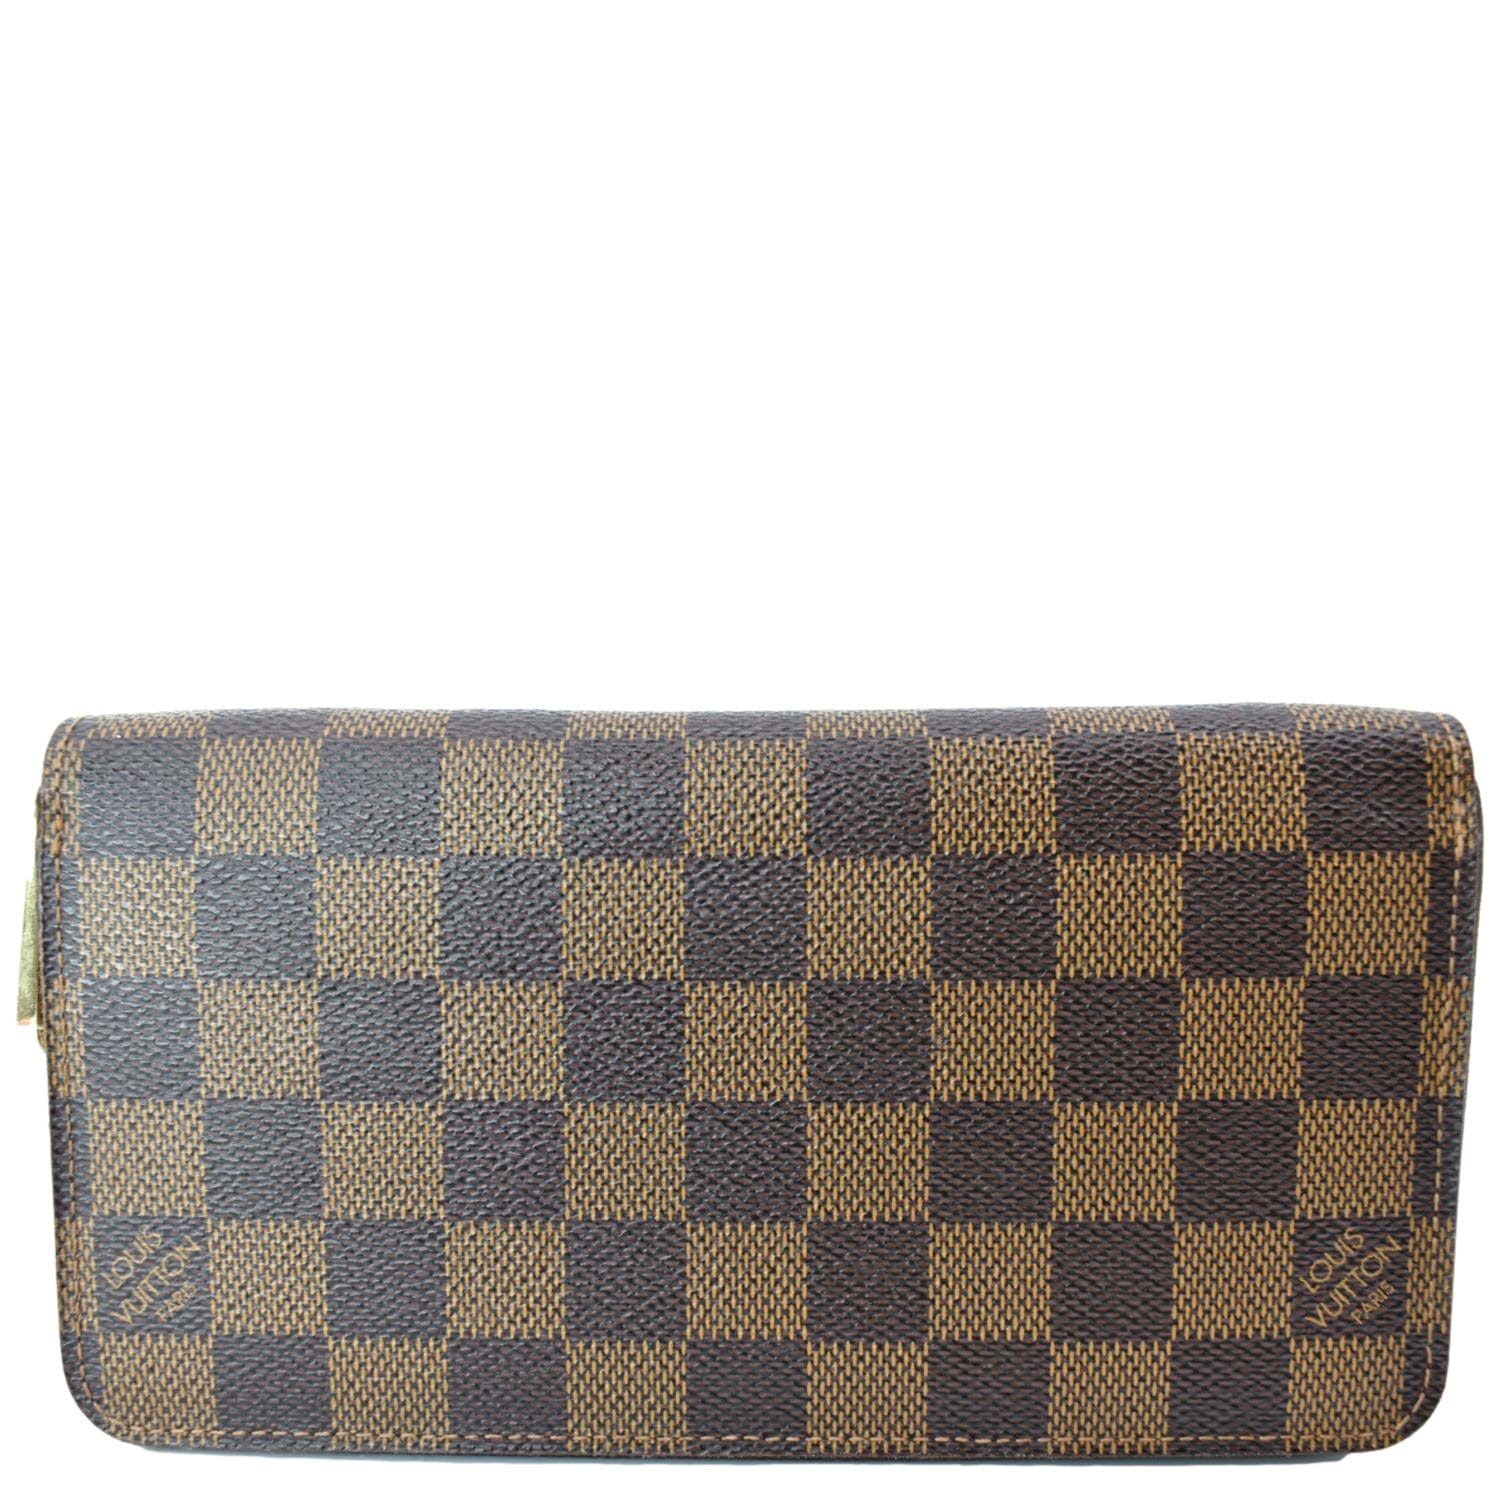 LOUIS VUITTON LOUIS VUITTON Zippy Wallet Round Long N41661 canvas Brown  Used unisex LV Damier N41661｜Product Code：2101217076340｜BRAND OFF Online  Store